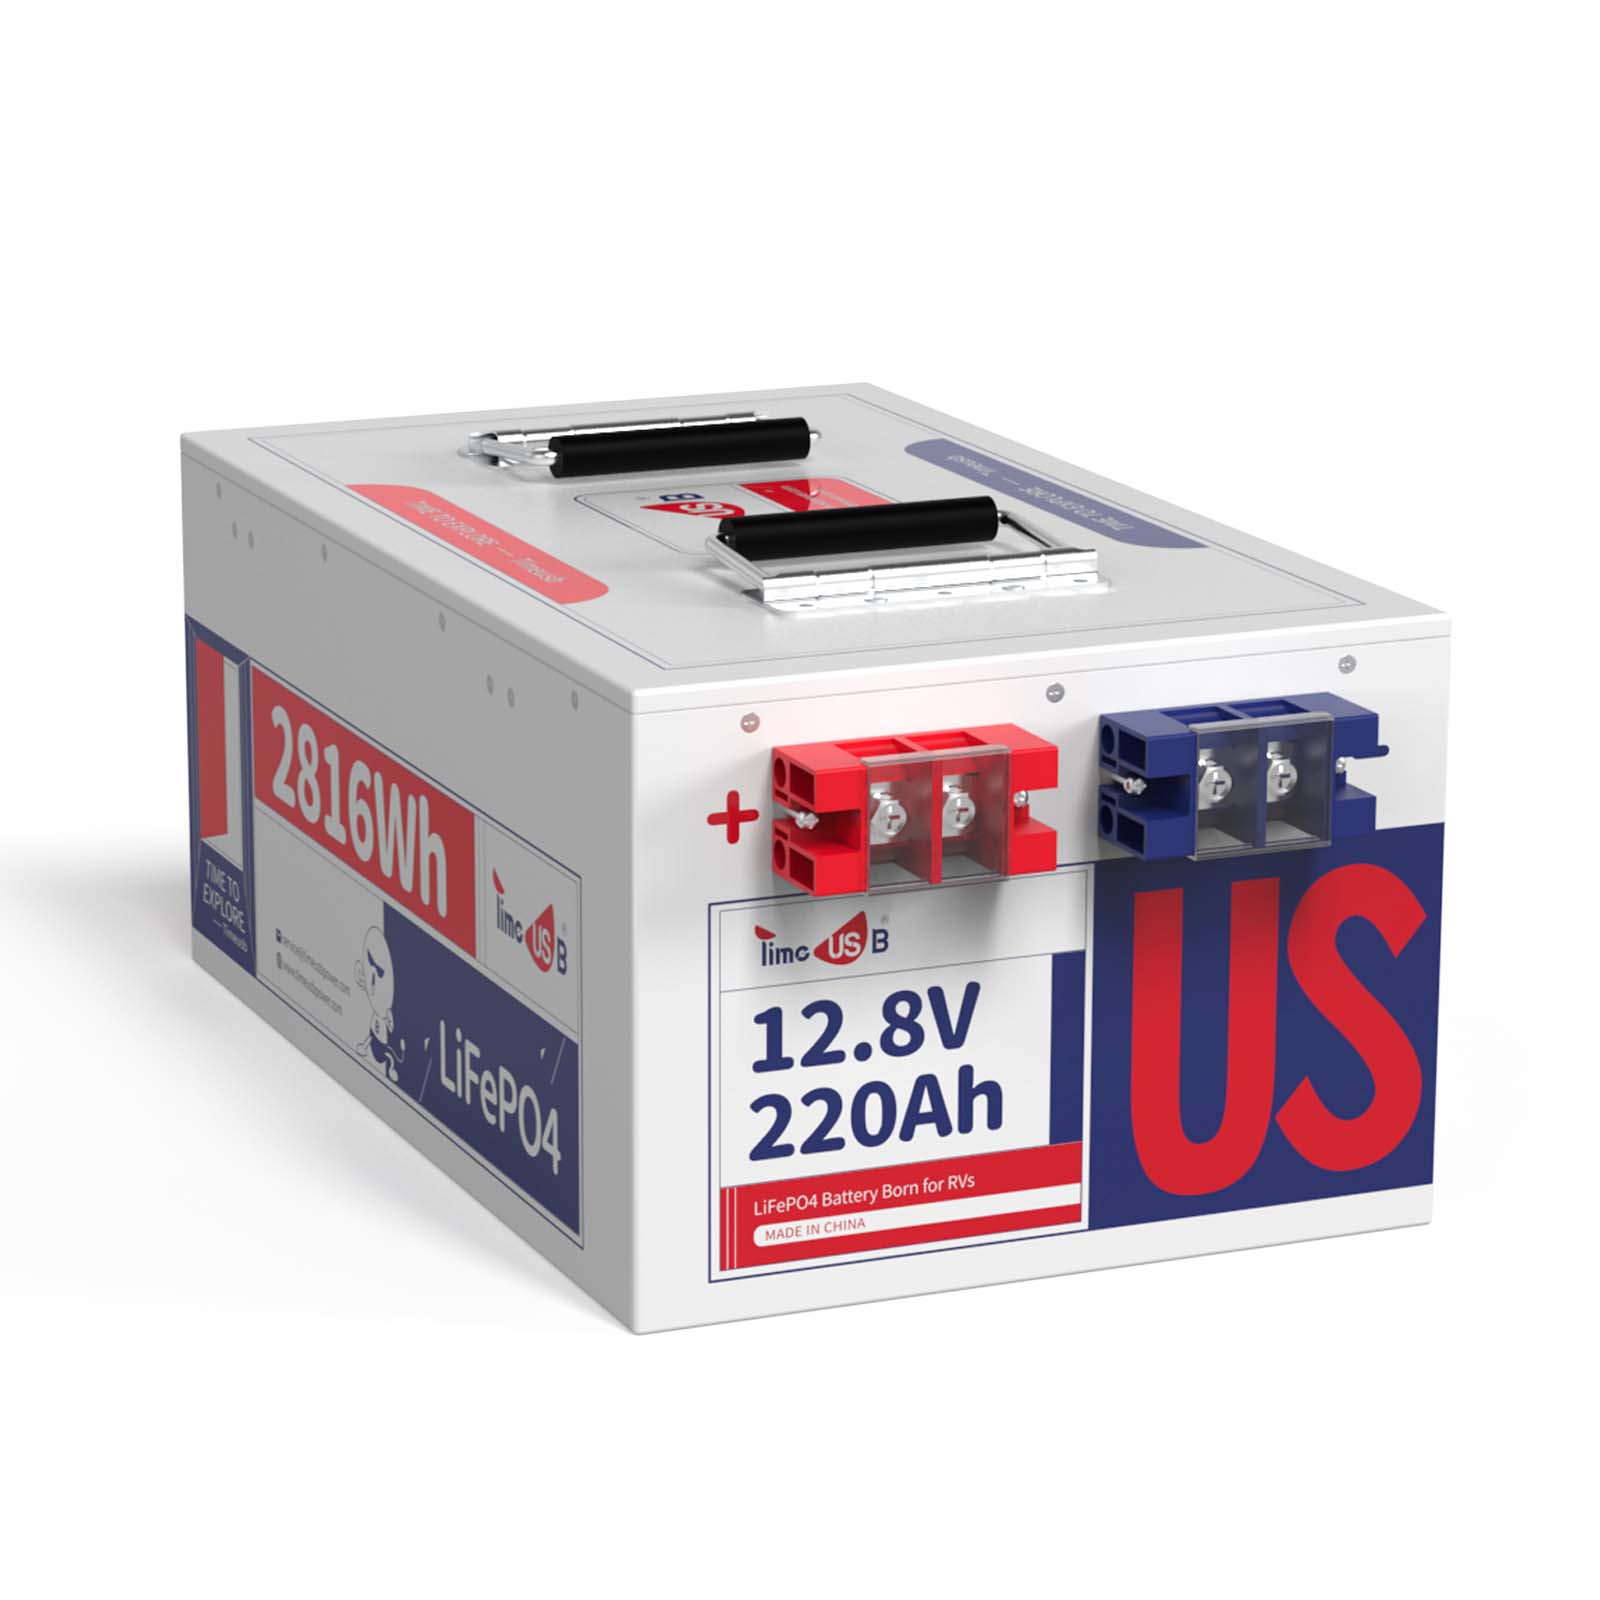 Second-hand 12V 220Ah  Deep Cycle LiFePO4 Battery | 2.816kWh & 1.92kW | 150A BMS